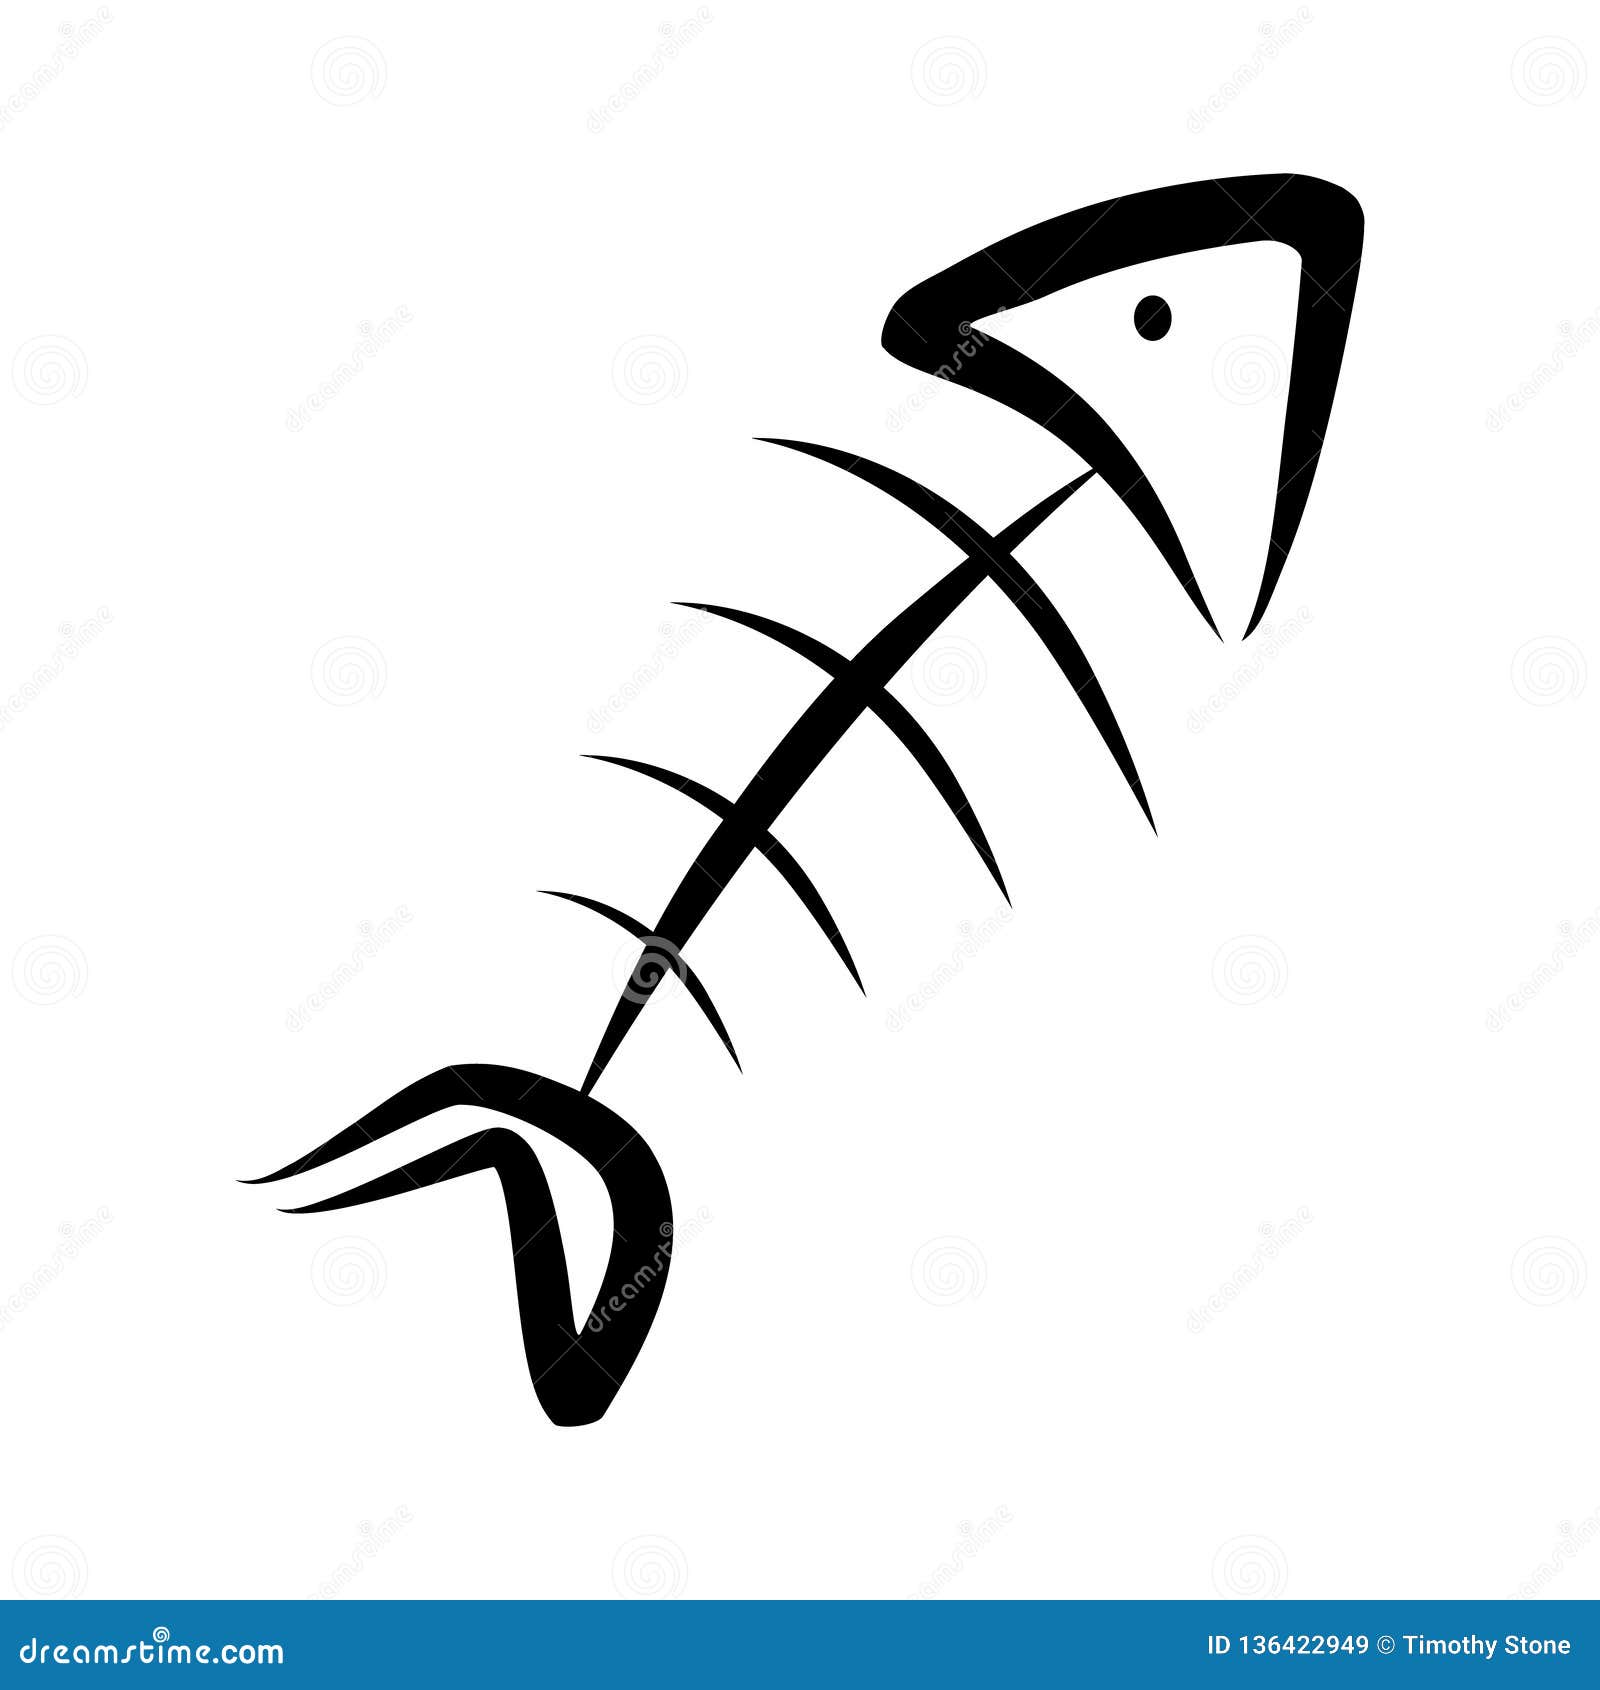 Vector Illustration of a Stylized Fish Skeleton Stock Vector